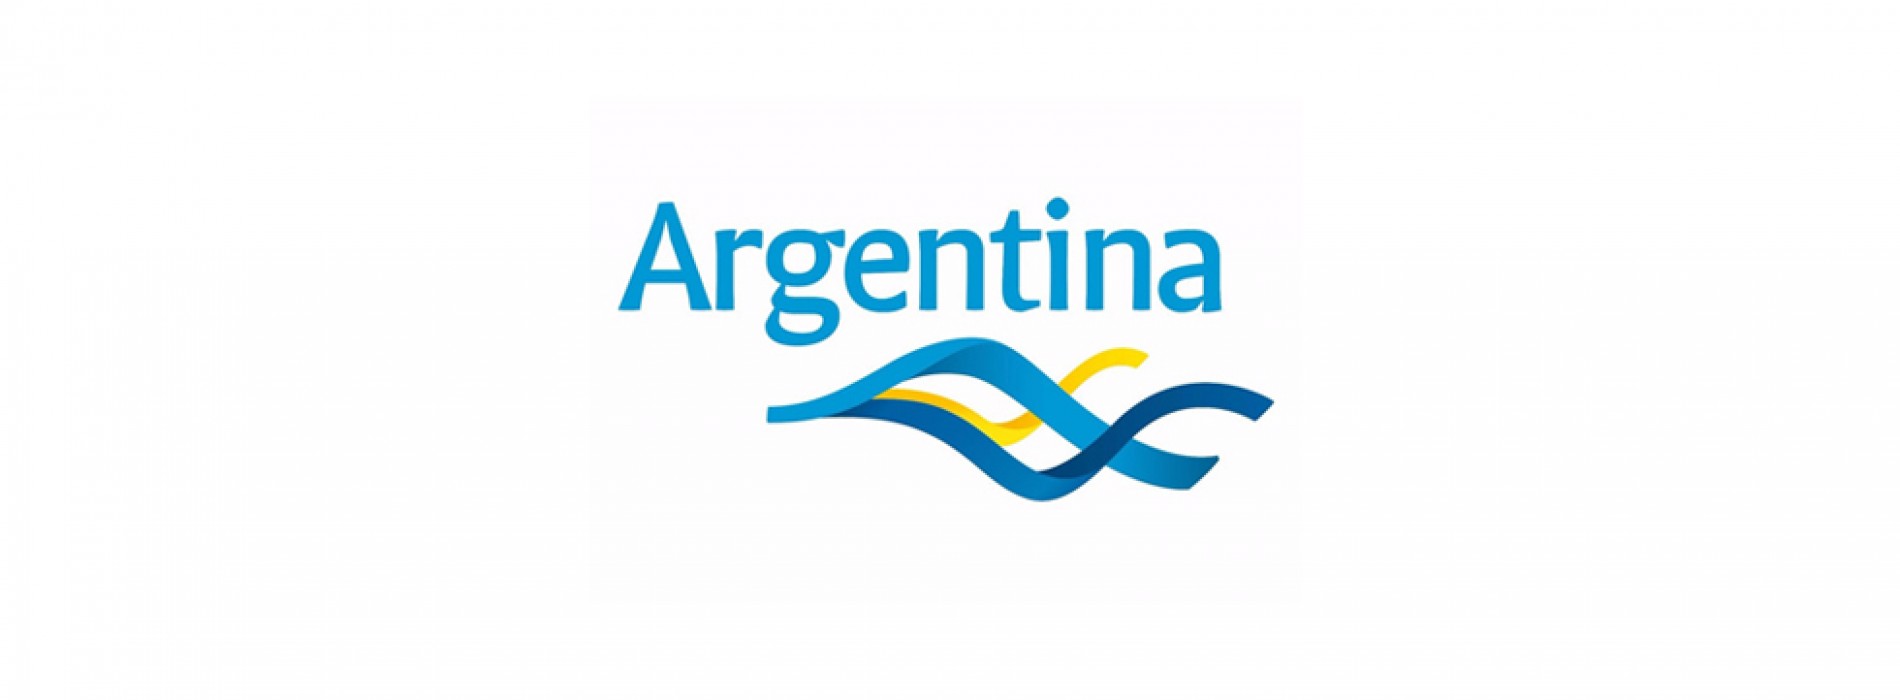 Argentina had an outstanding participation in IBTM World Fair in Barcelona